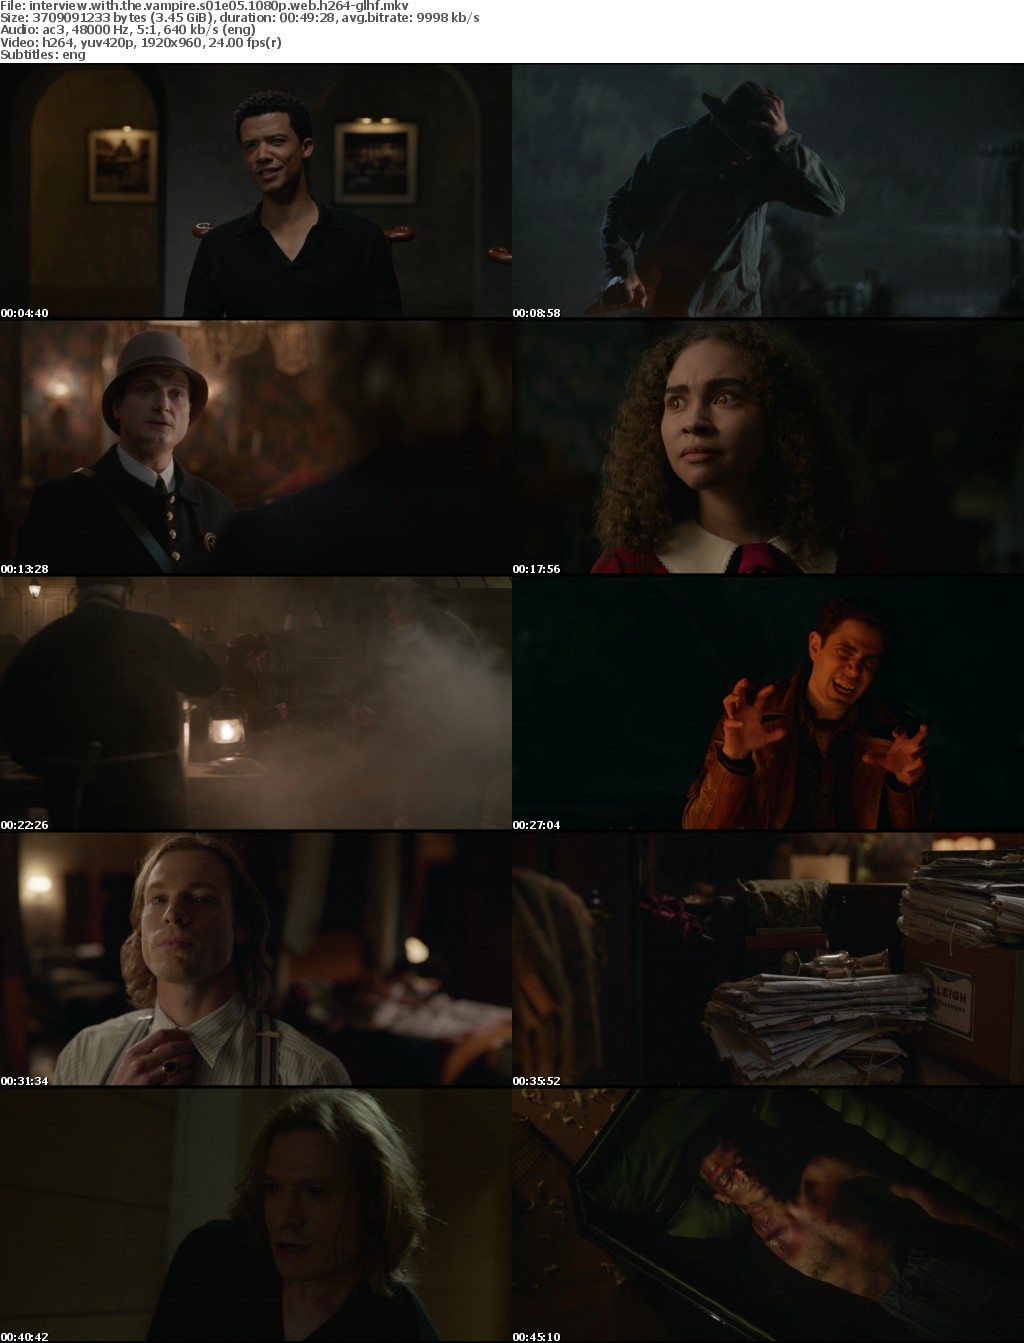 Interview with the Vampire S01E05 1080p WEB H264-GLHF